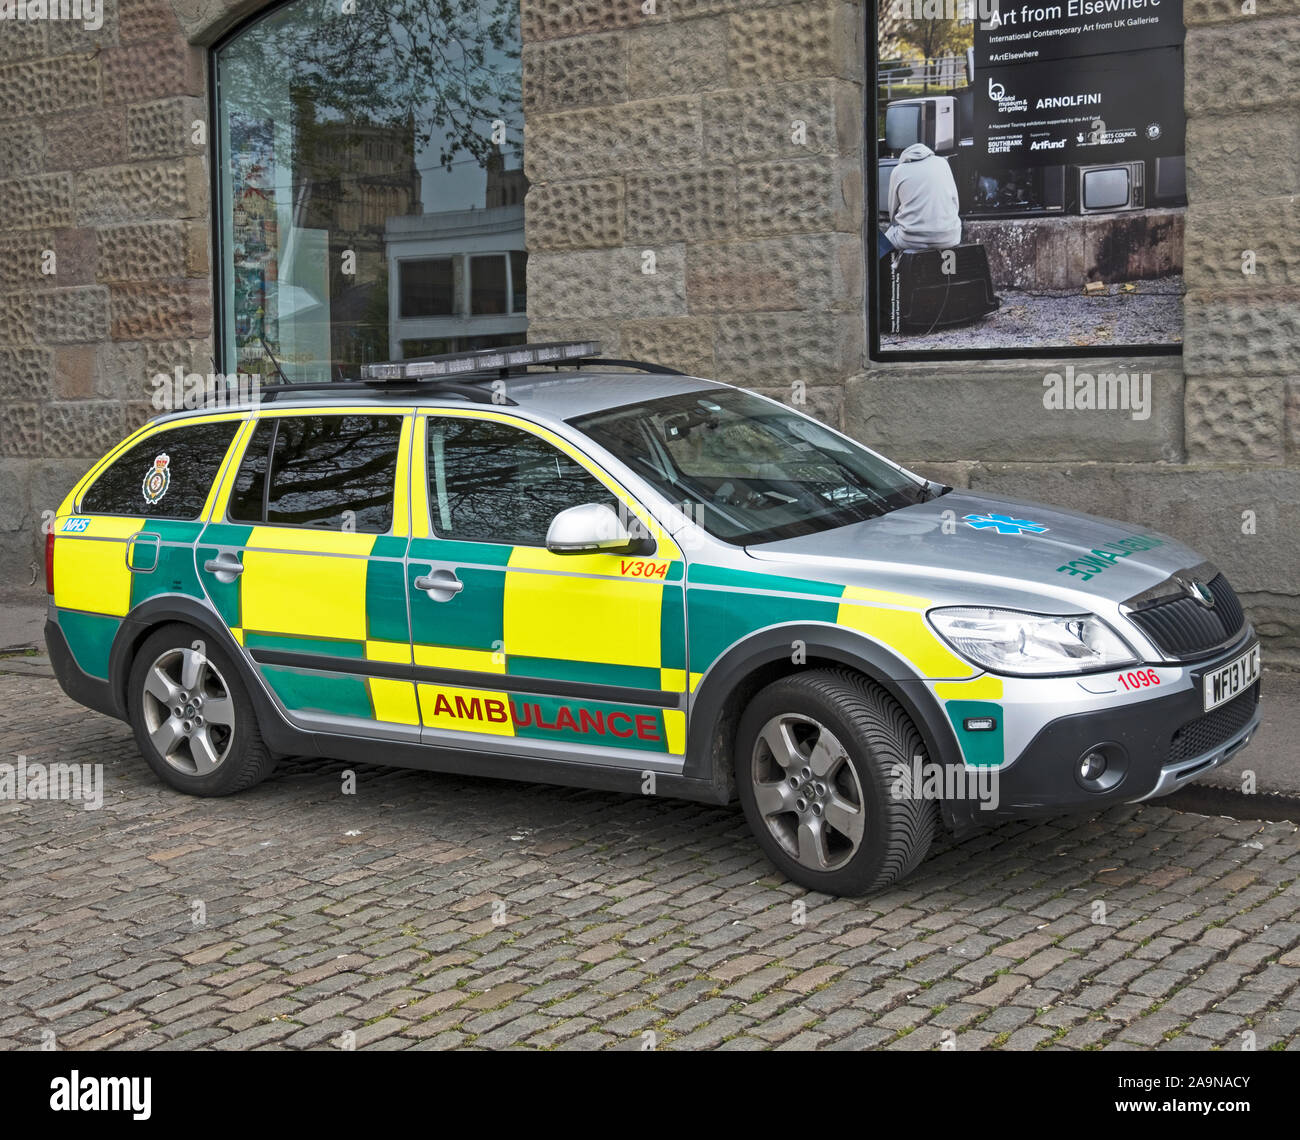 An ambulance parked outside the Arnolfini arts centre in Bristol, UK Stock Photo